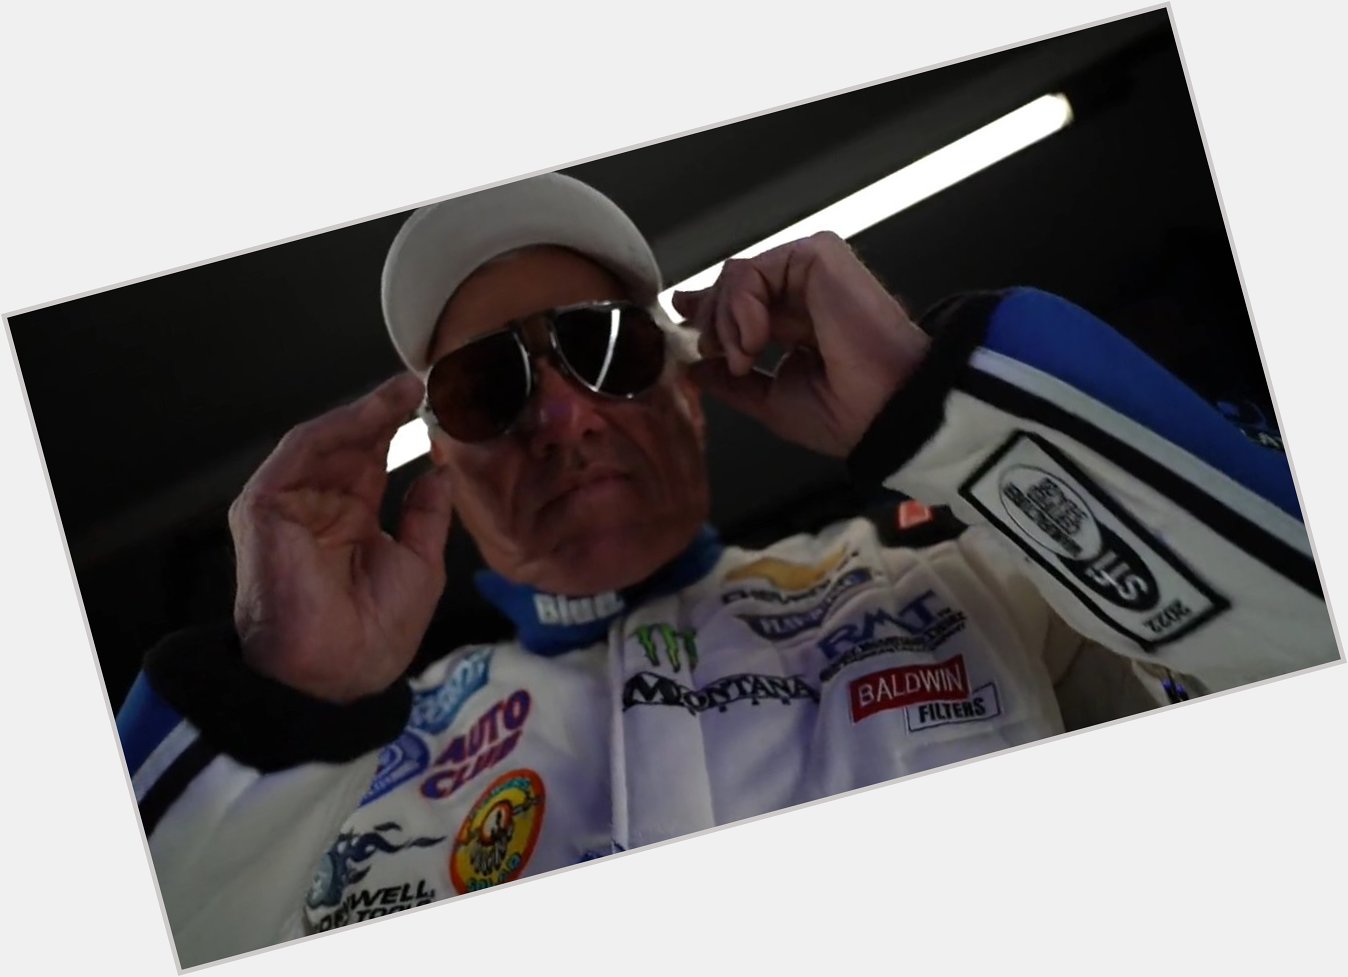 16X is celebrating a birthday today Help us wish a very HAPPY BIRTHDAY to the legend, John Force!  